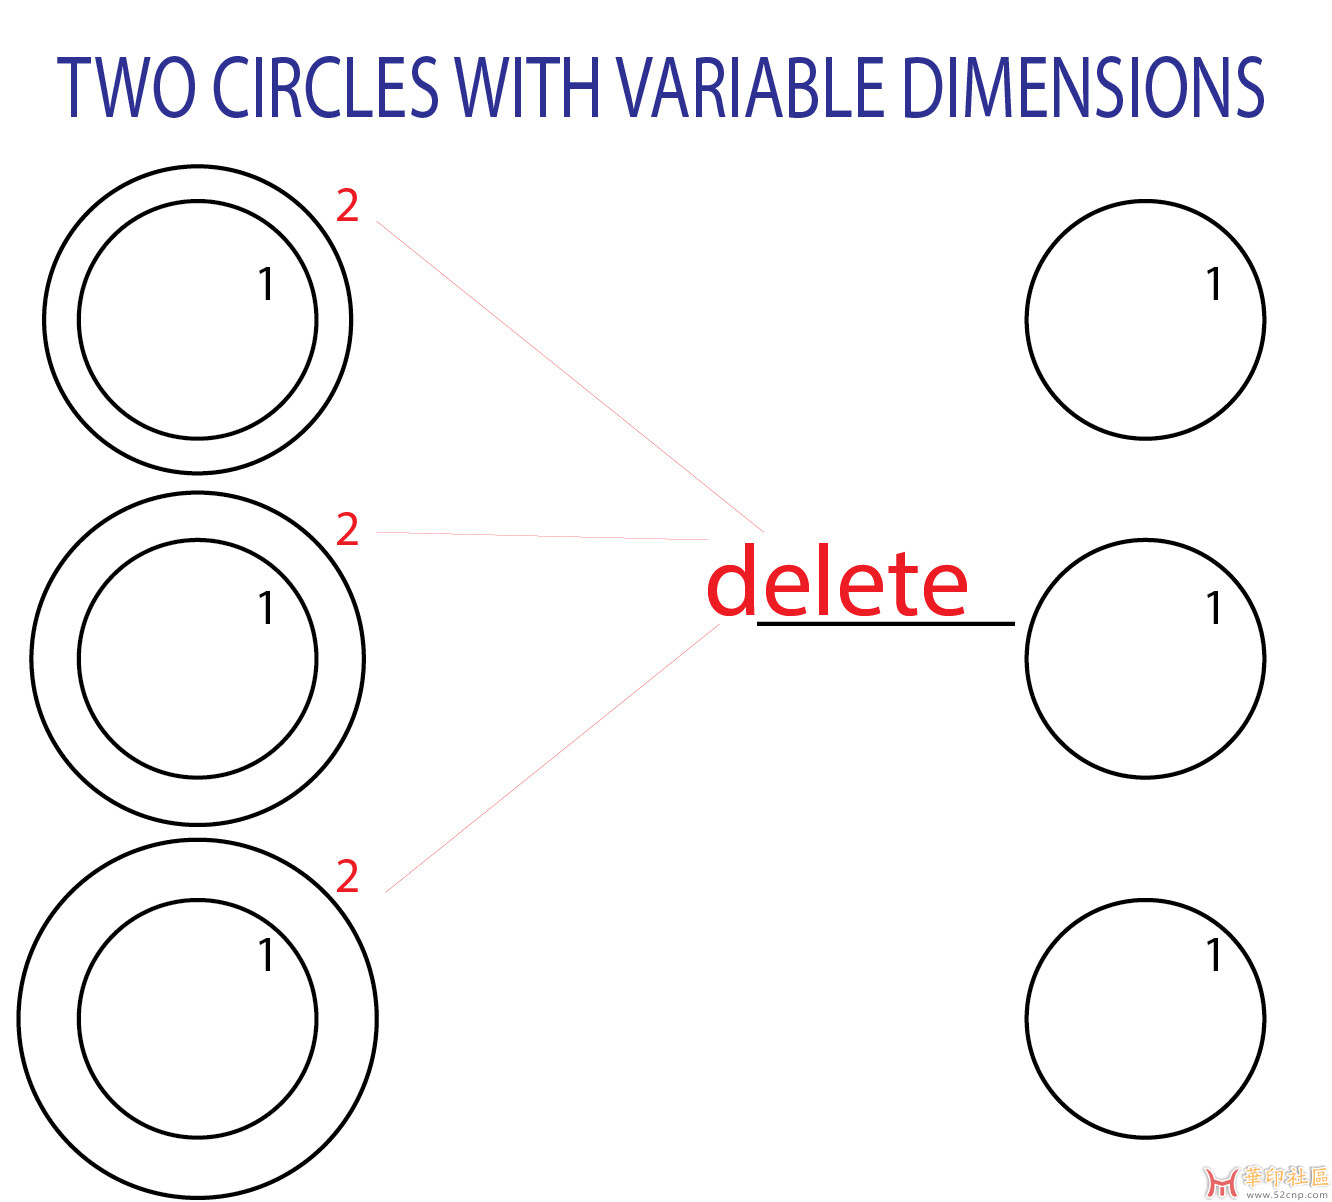 TWO CIRCLES WITH VARIABLE DIMENSIONS